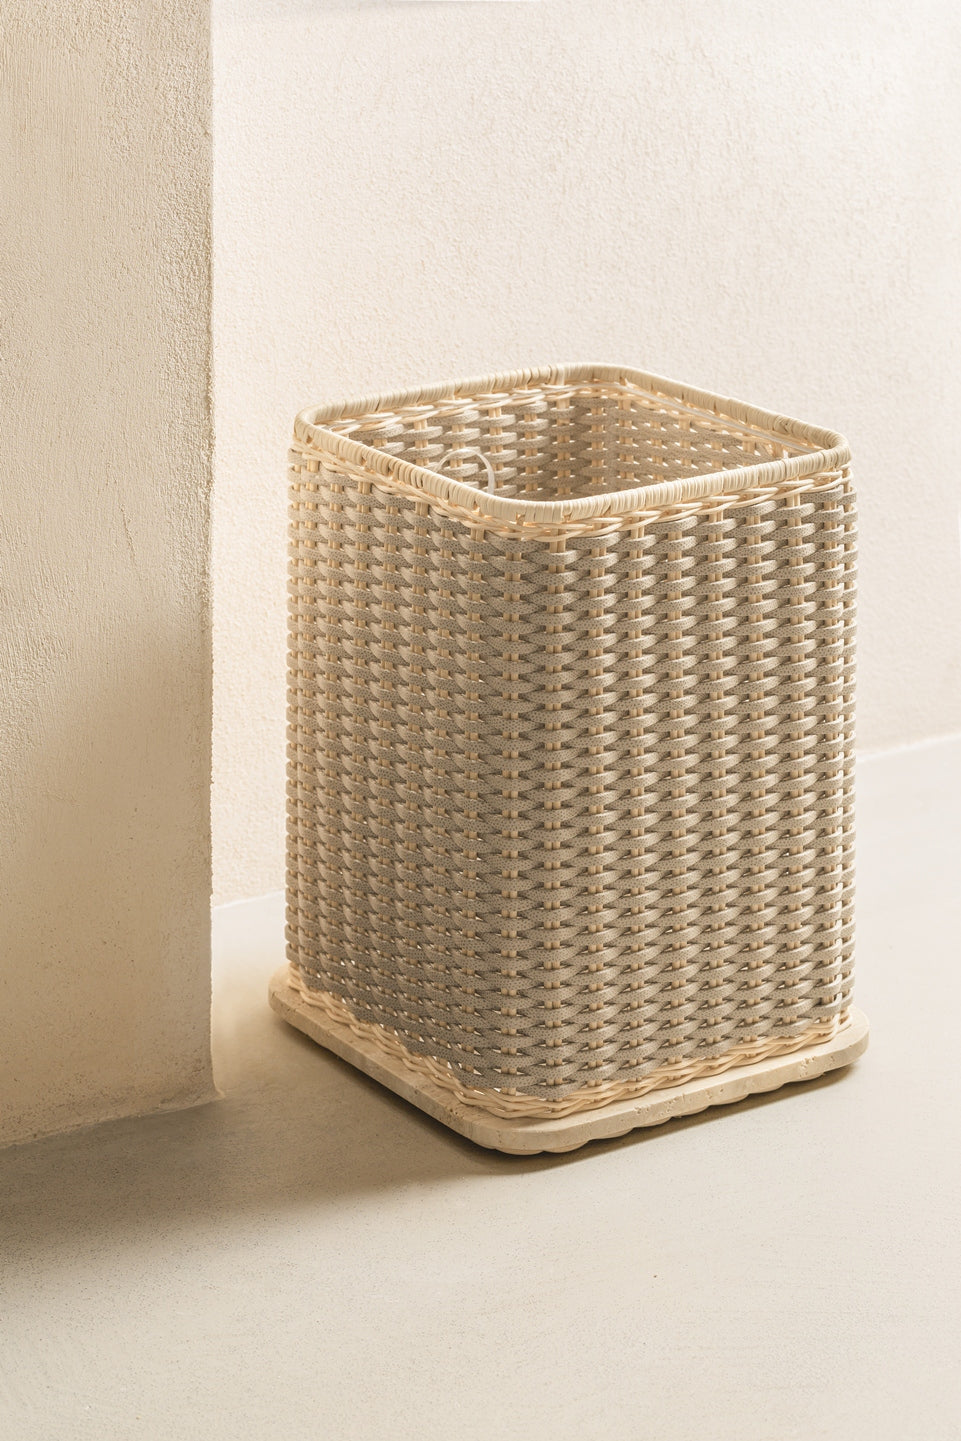 Pigment France Albi Leather & Rattan Travertine Bin | Woven leather and rattan structure | Features a travertine base | Removable plexiglass inner structure for easy cleaning | Explore Luxury Home Accessories at 2Jour Concierge, #1 luxury high-end gift & lifestyle shop